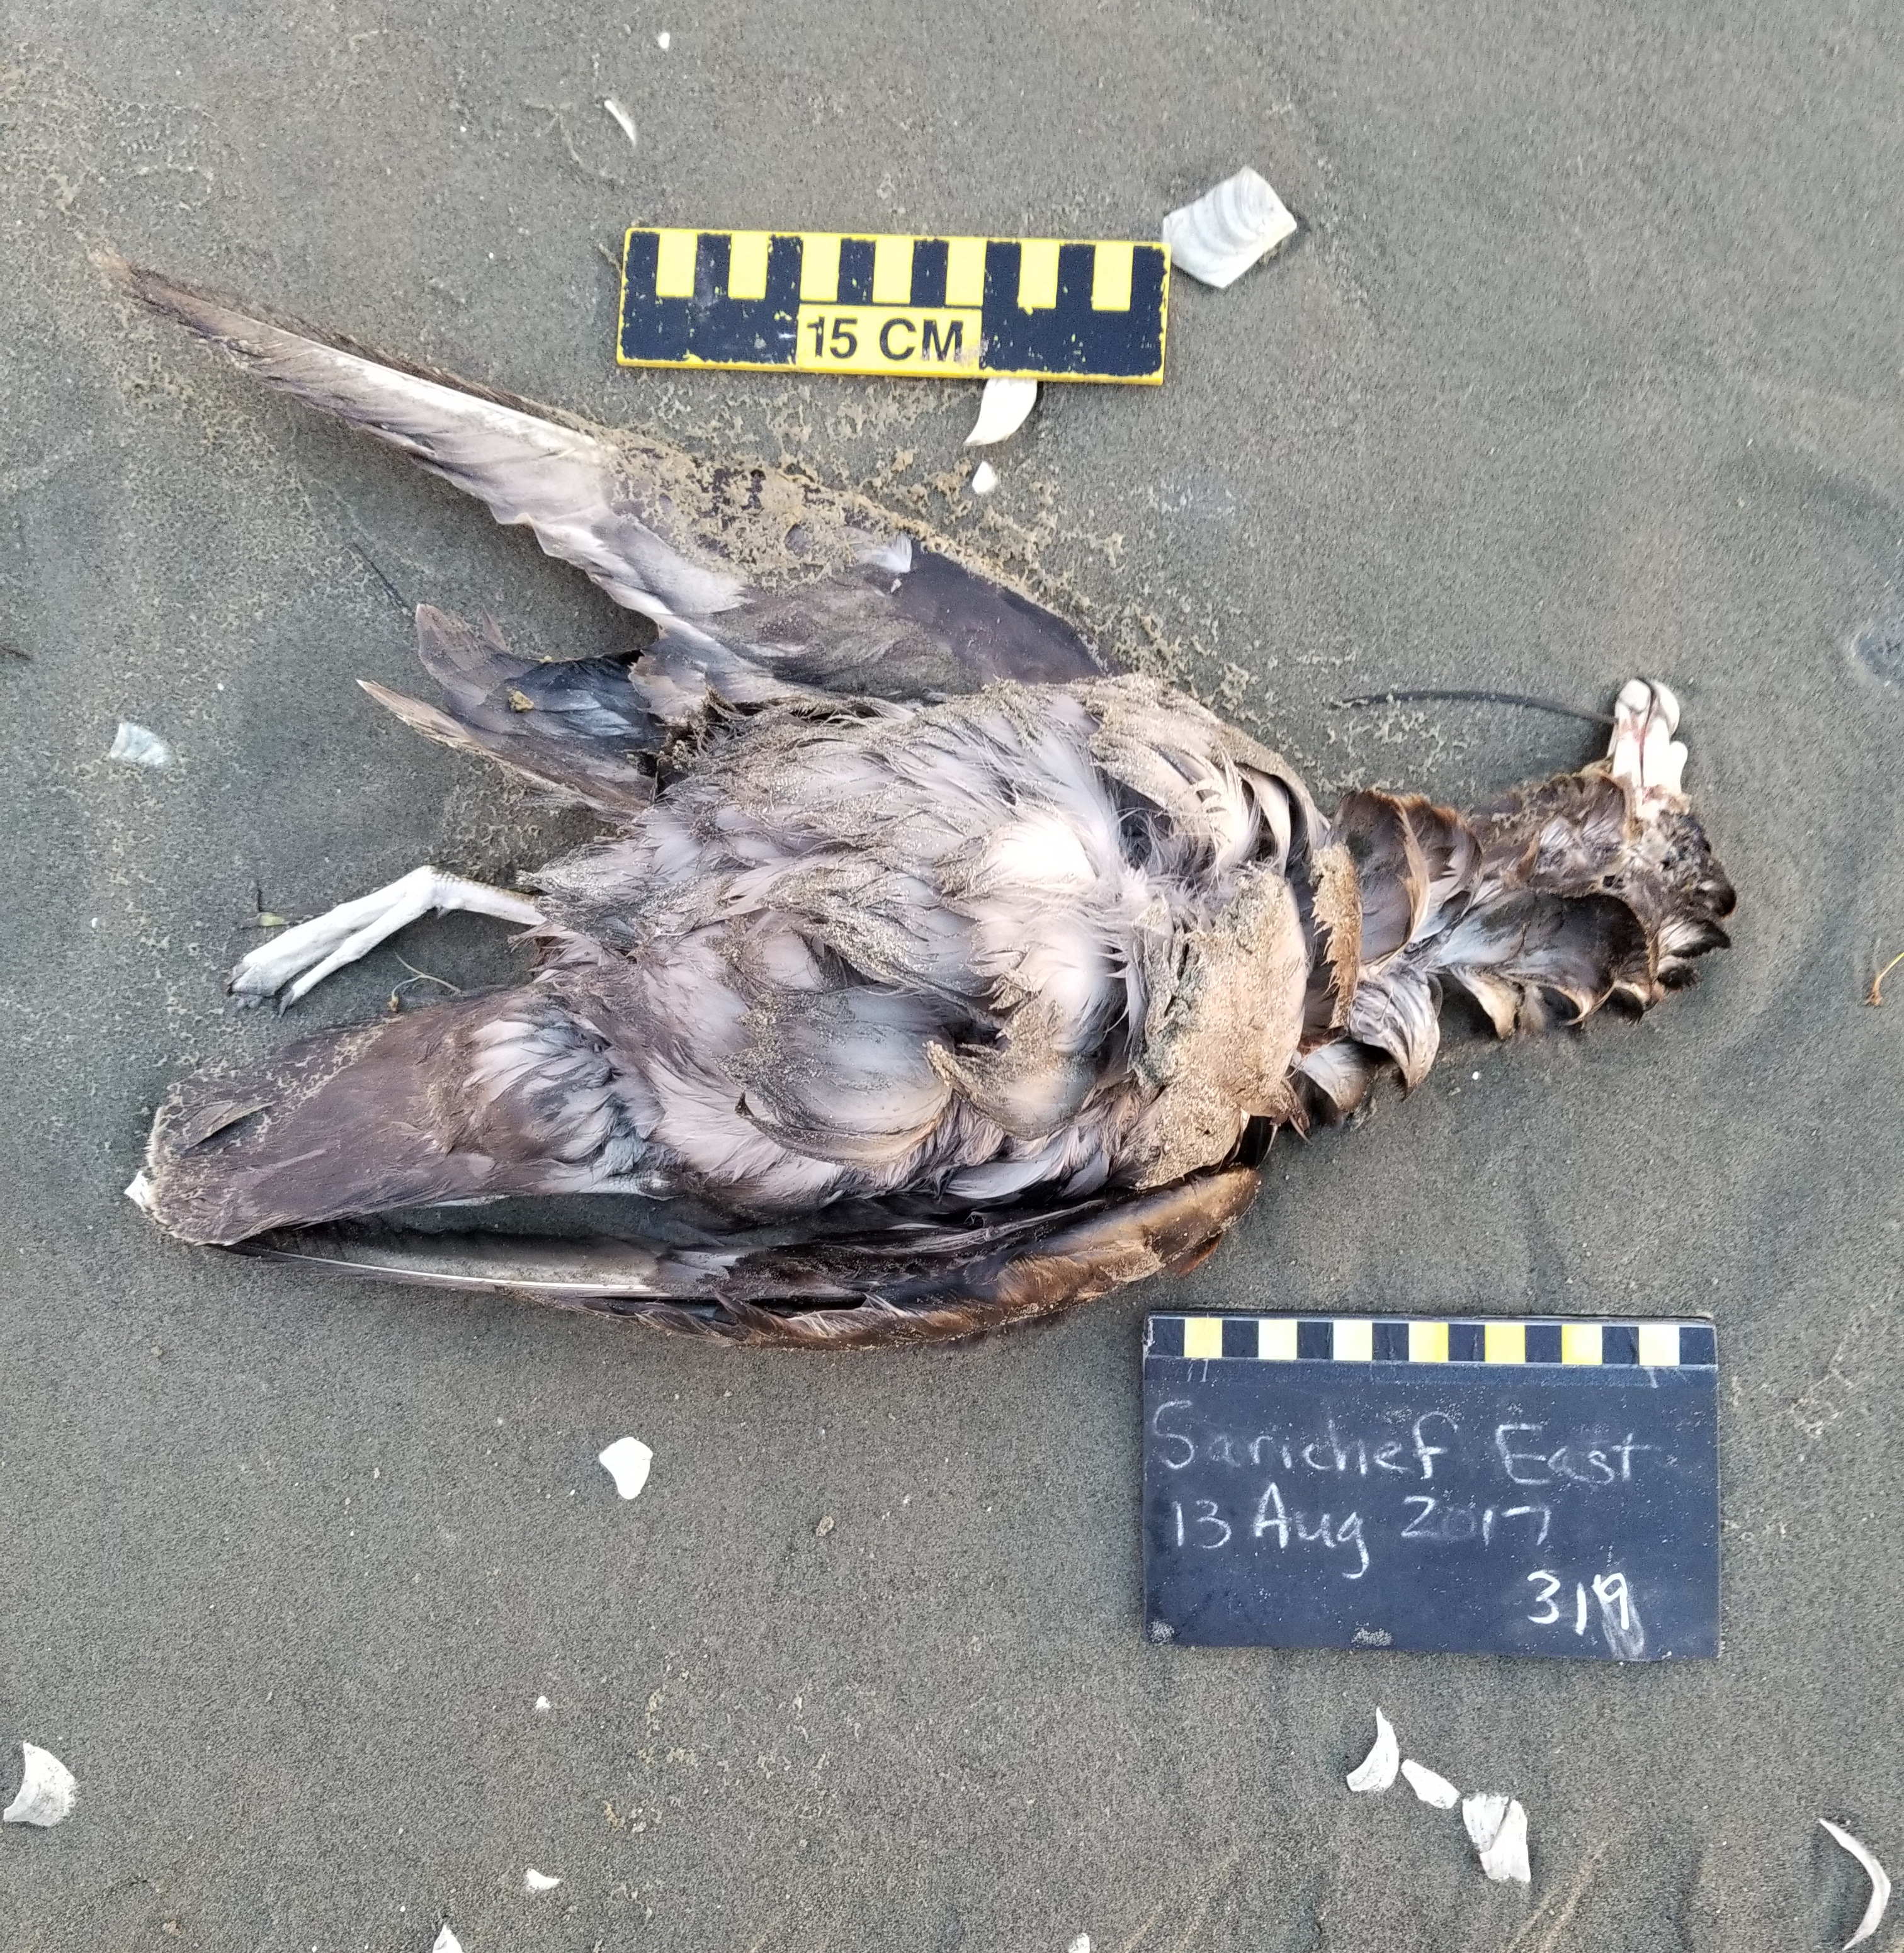 A deadnorthern fulmar, dark morph was found near Shishmaref Aug. 13, 2017. Hundreds of dead birds have been found on the western and north western coasts of Alaska in the late summer 2017. (Ken Stenek / Coastal Observation and Seabird Survey Team)